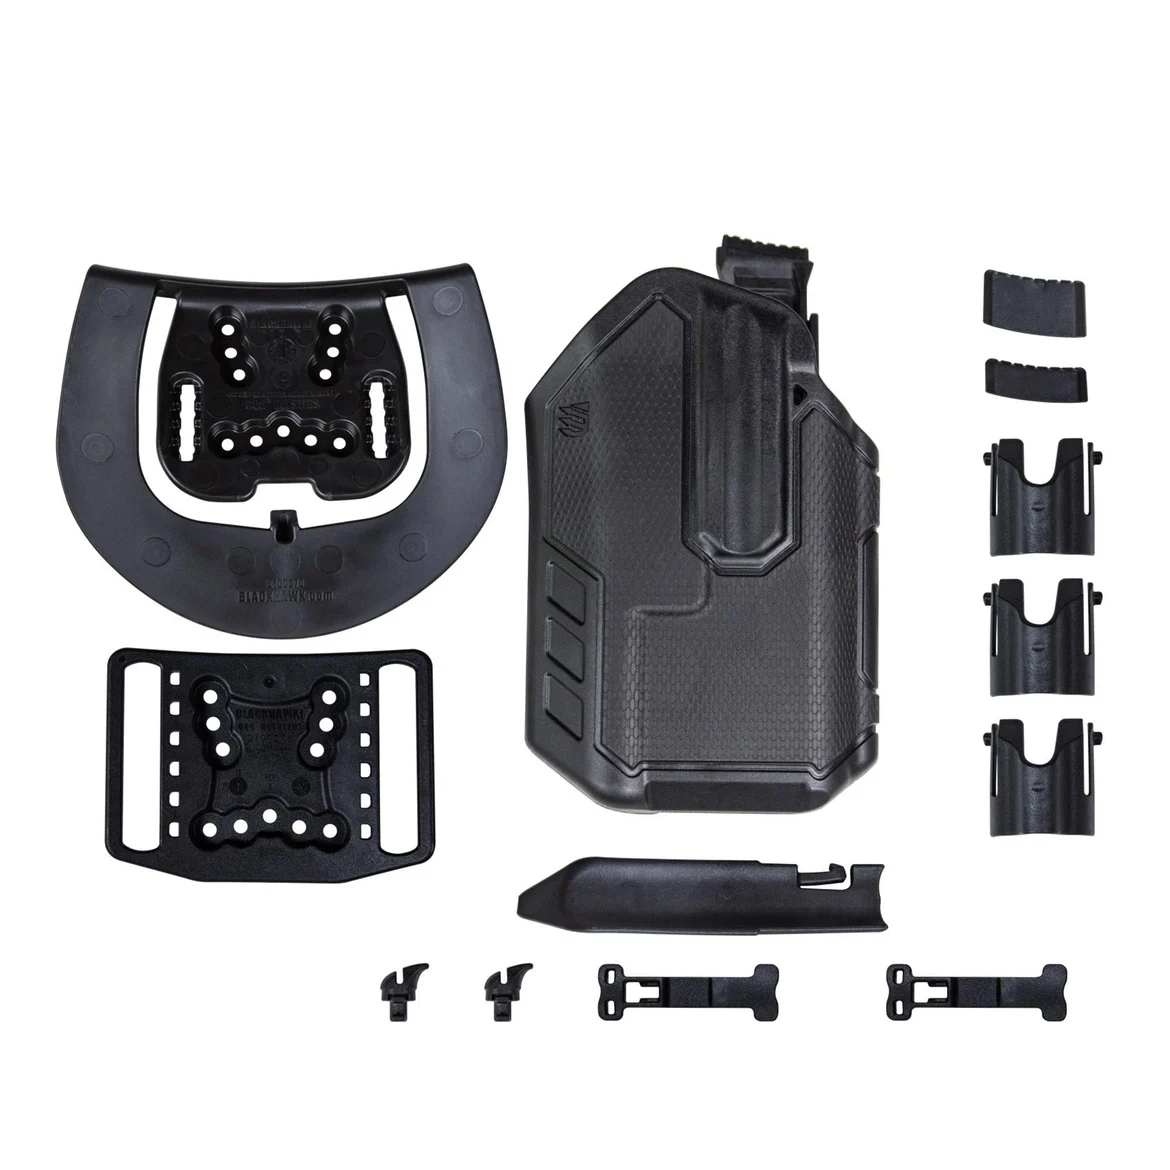 

GLOCK Holster SIG Universal Quick Release lamp cover TLR1 is suitable for G17 G19 G34 P320 P226